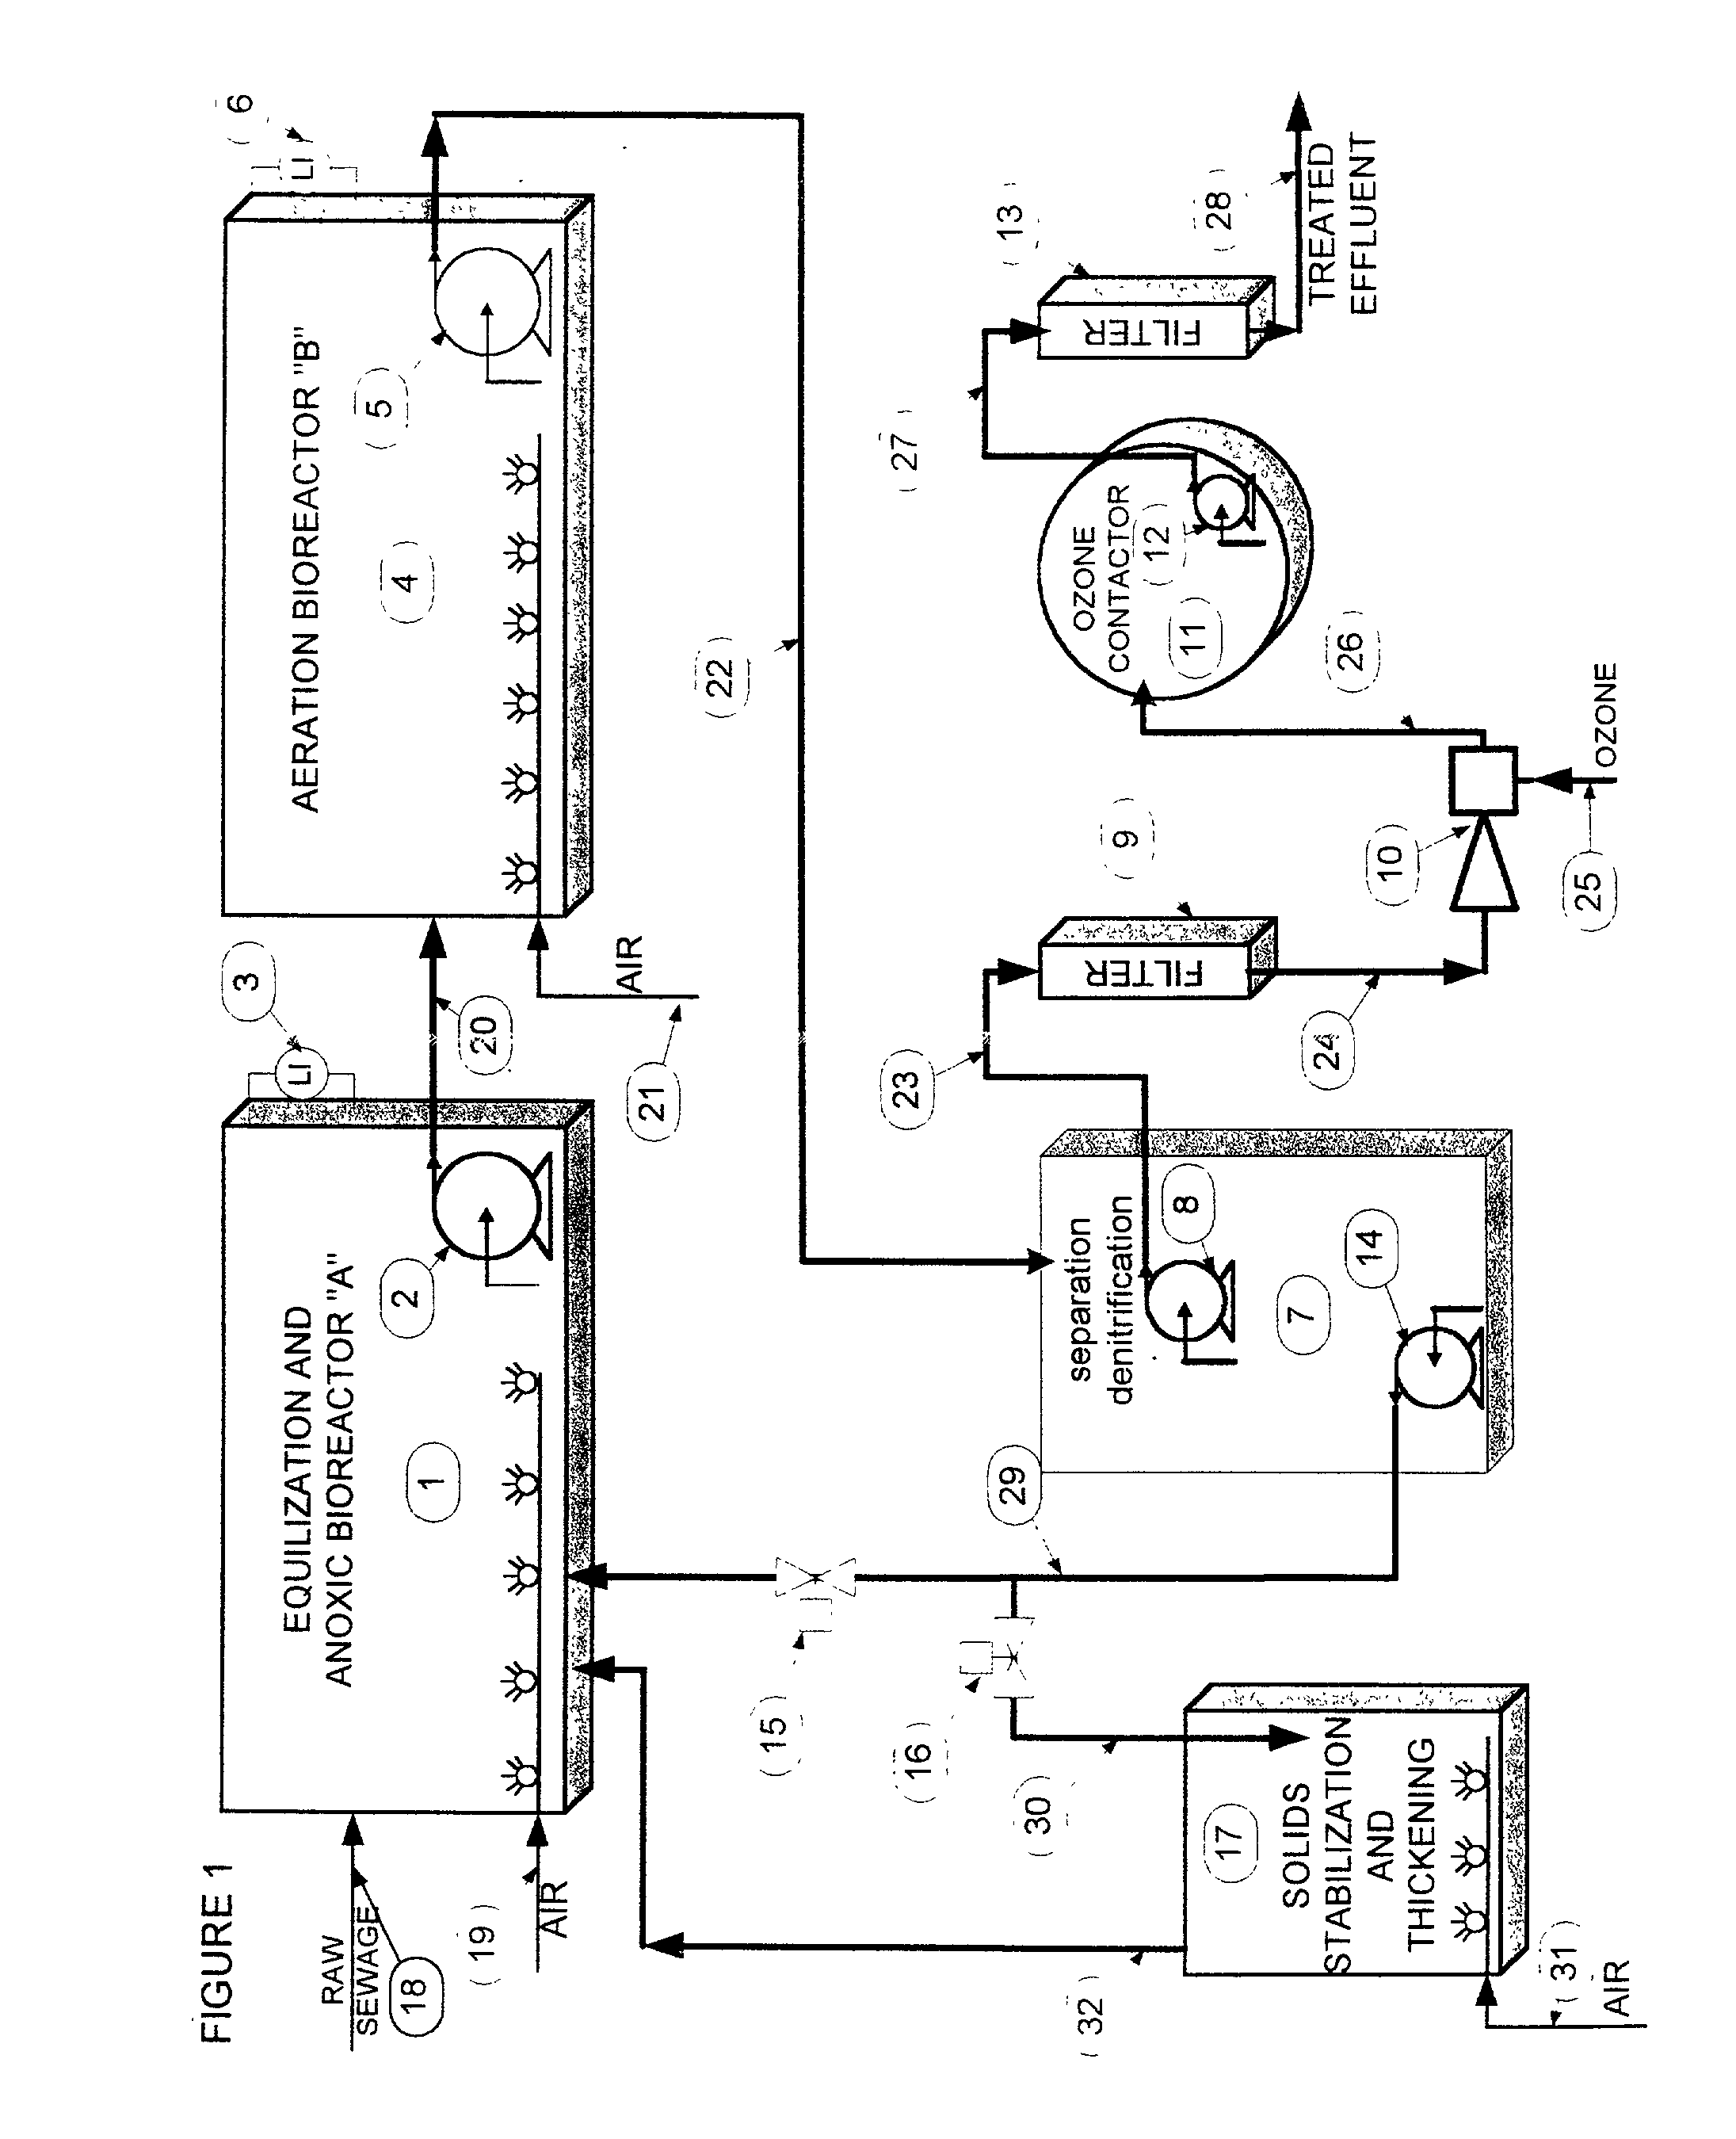 Modified intermittent cycle, extended aeration system (miceas)